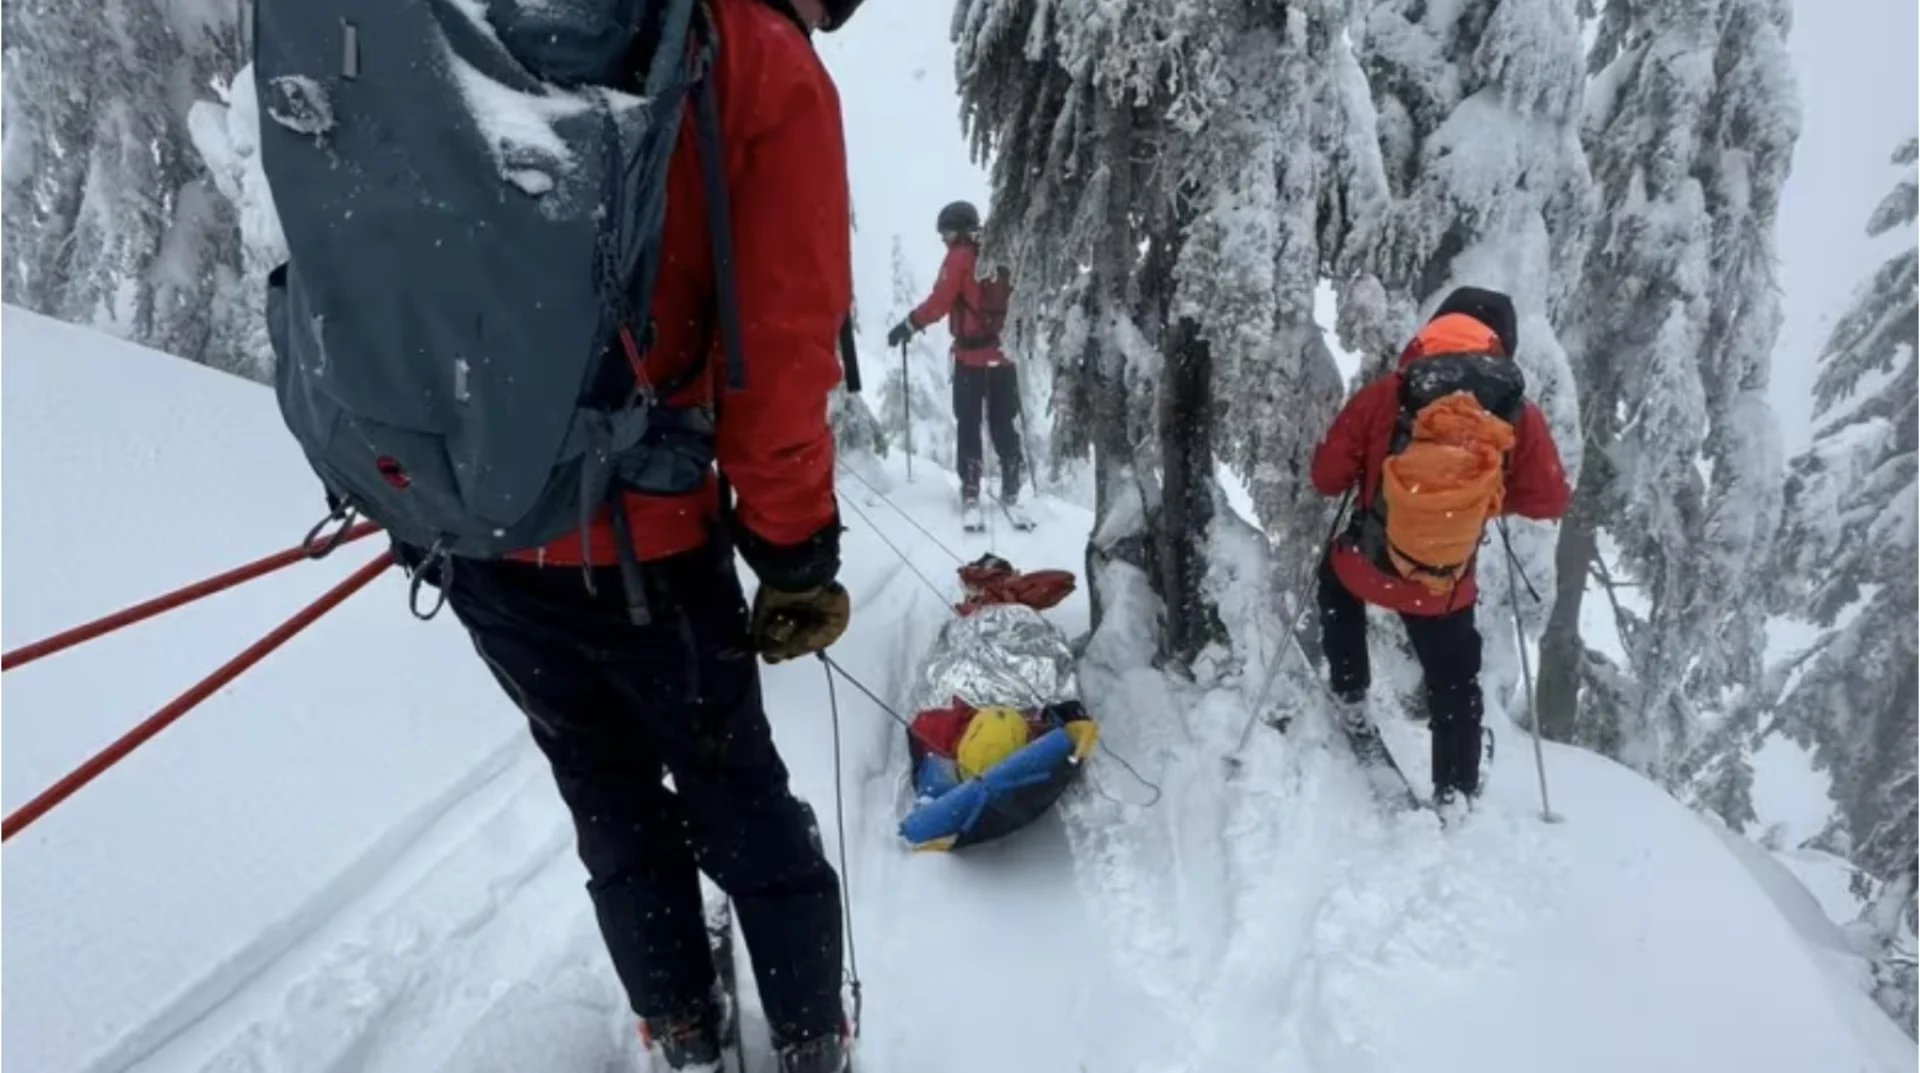 Woman survives being buried by avalanche for almost 20 minutes